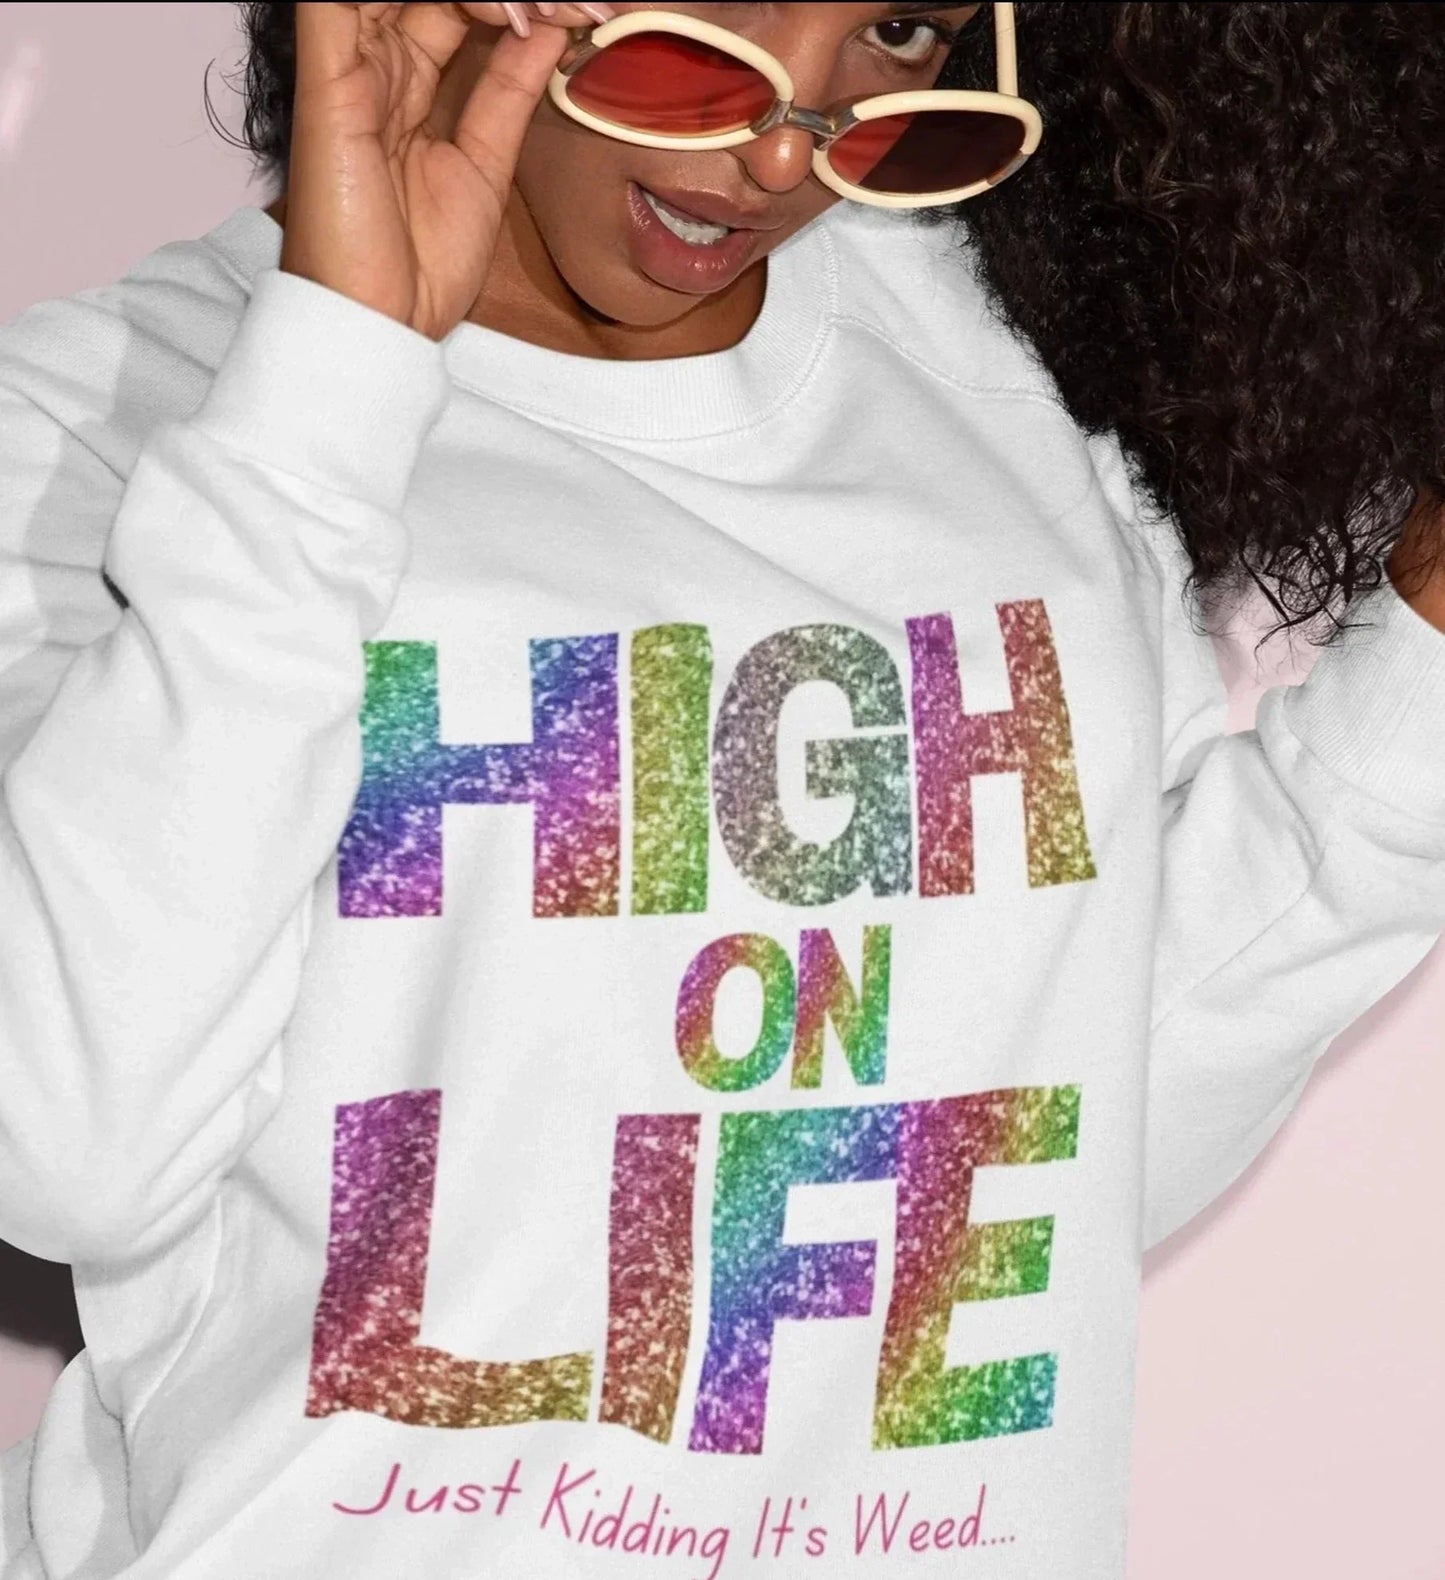 High On Life Glittery Design... Just Kidding It's Weed, Sarcastic Stoner Shirt